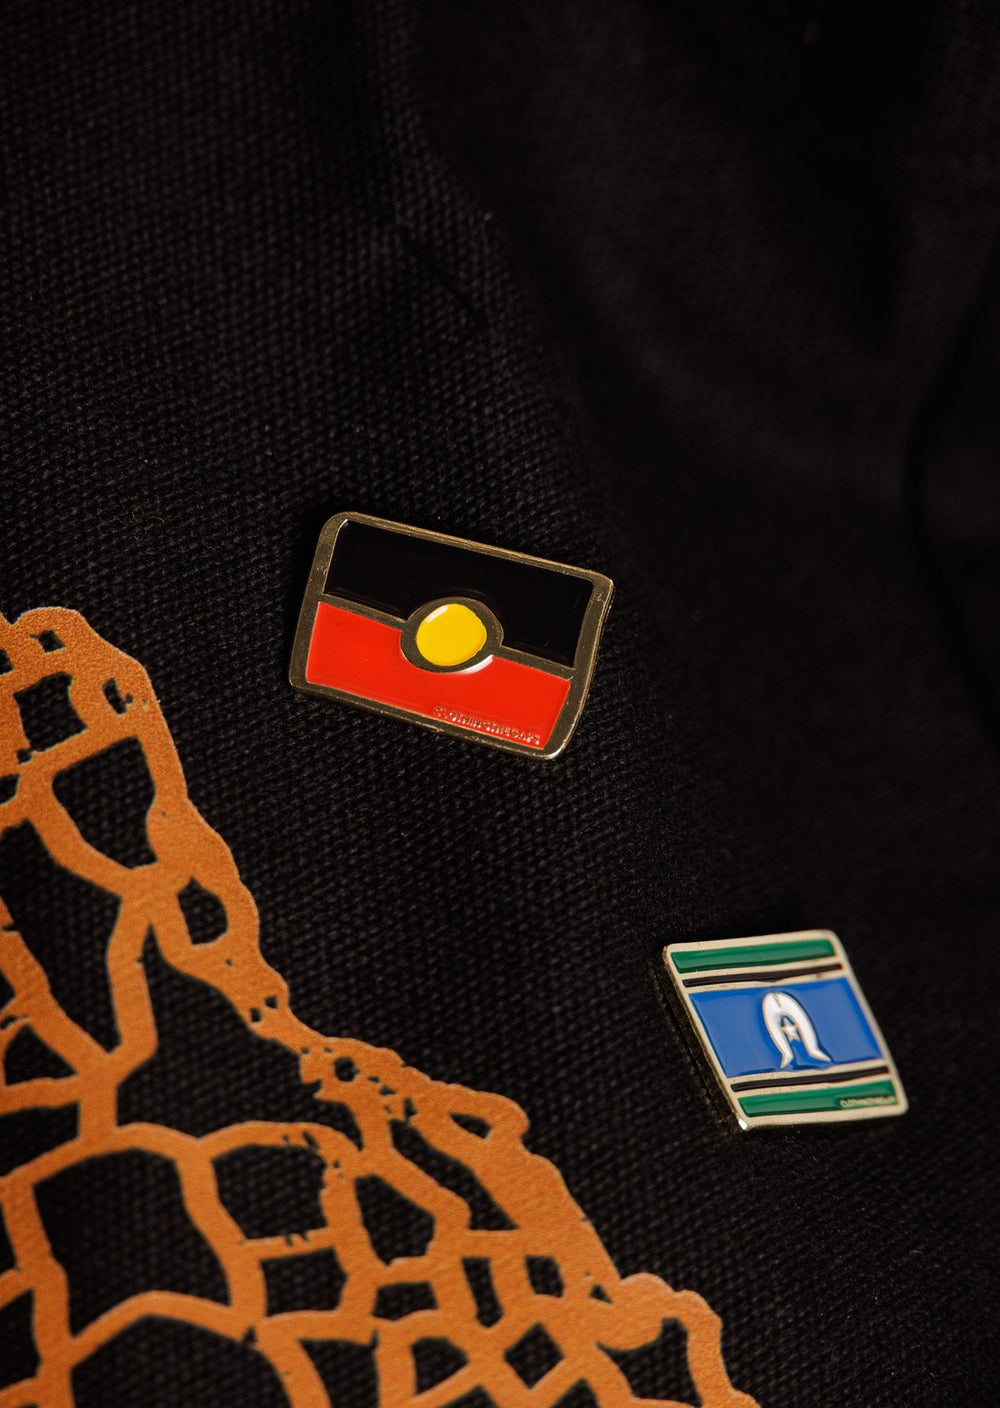 Clothing The Gaps. Black, yellow and red Aboriginal flag pin with gold outline and gold backing.